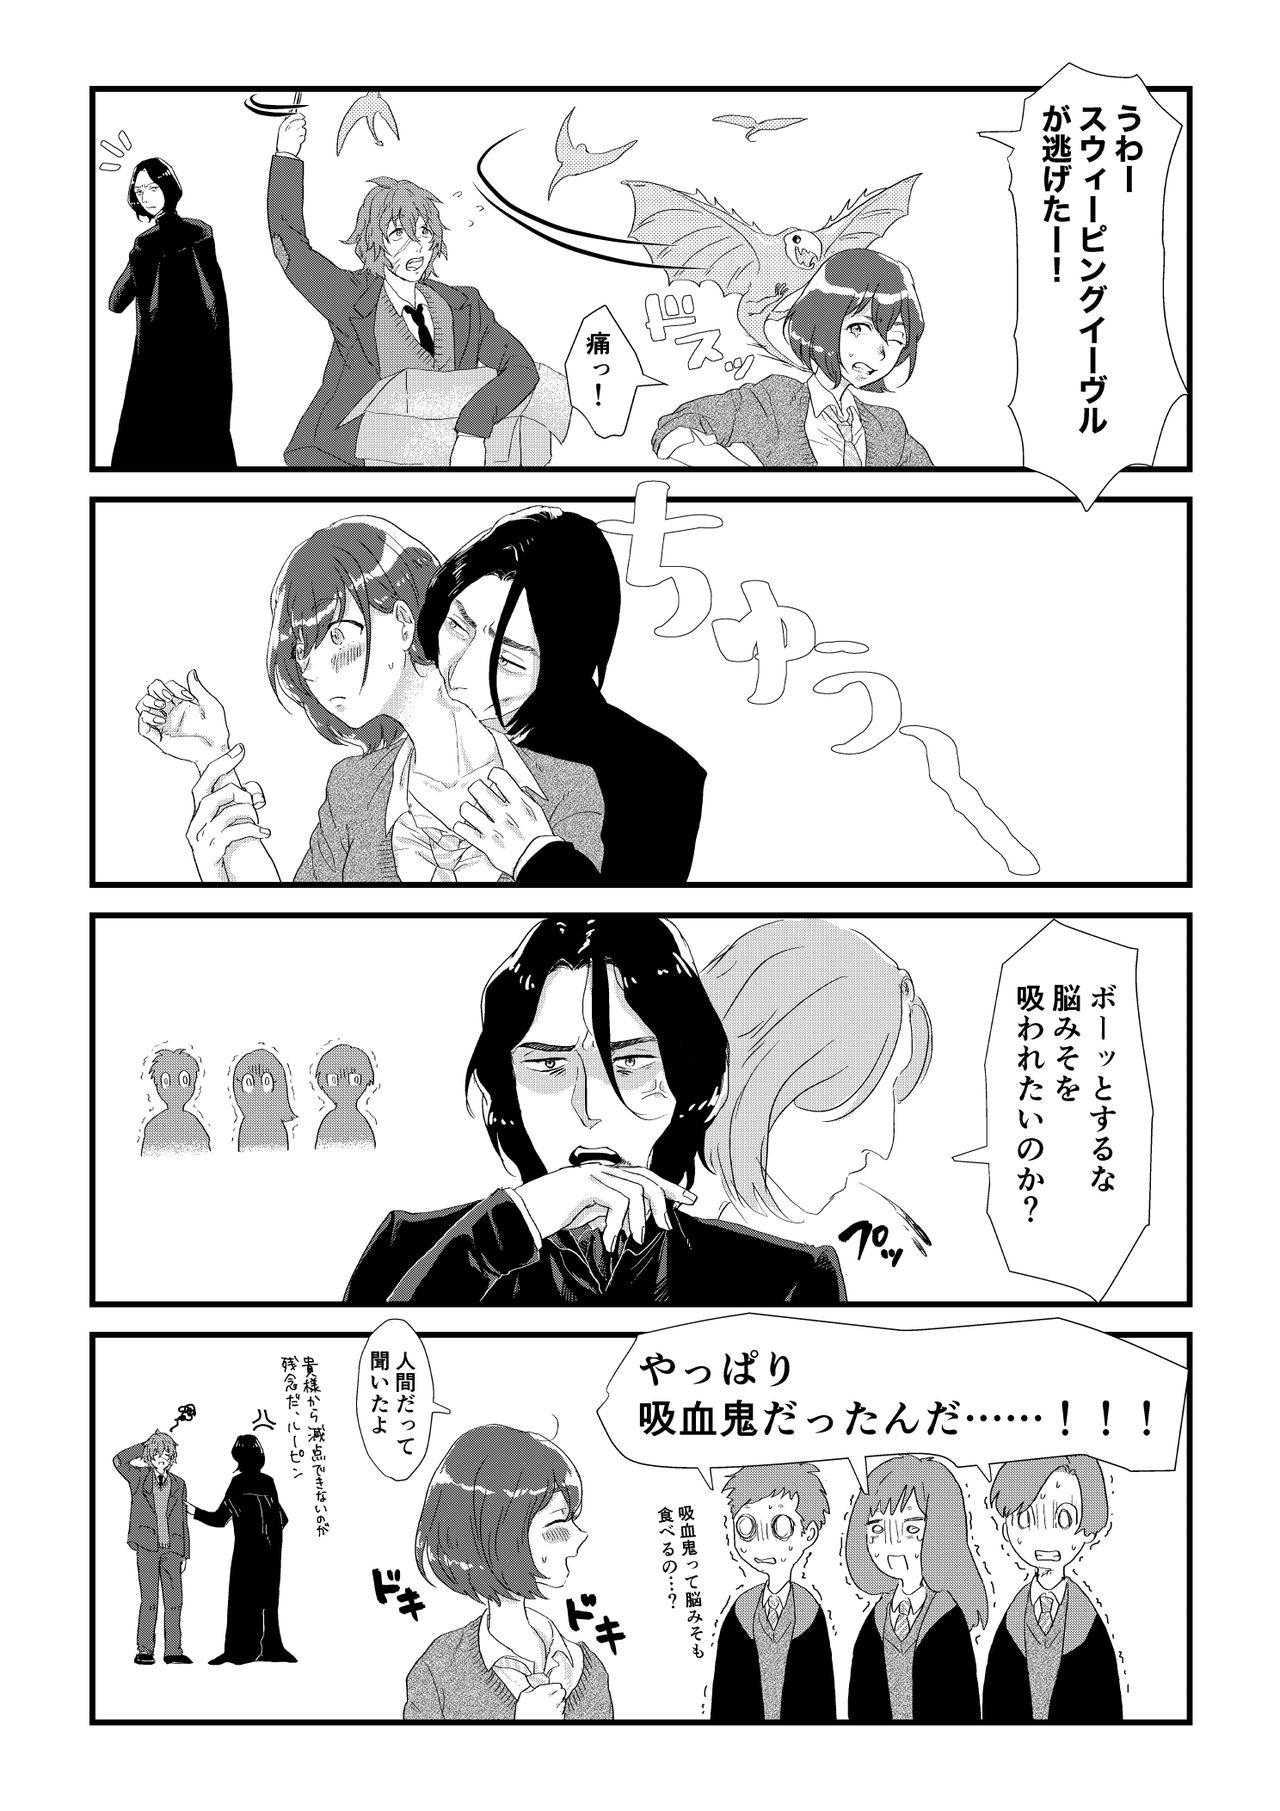 Natural Professor Snape and the Hufflepuff transfer student - Harry potter Chudai - Page 5